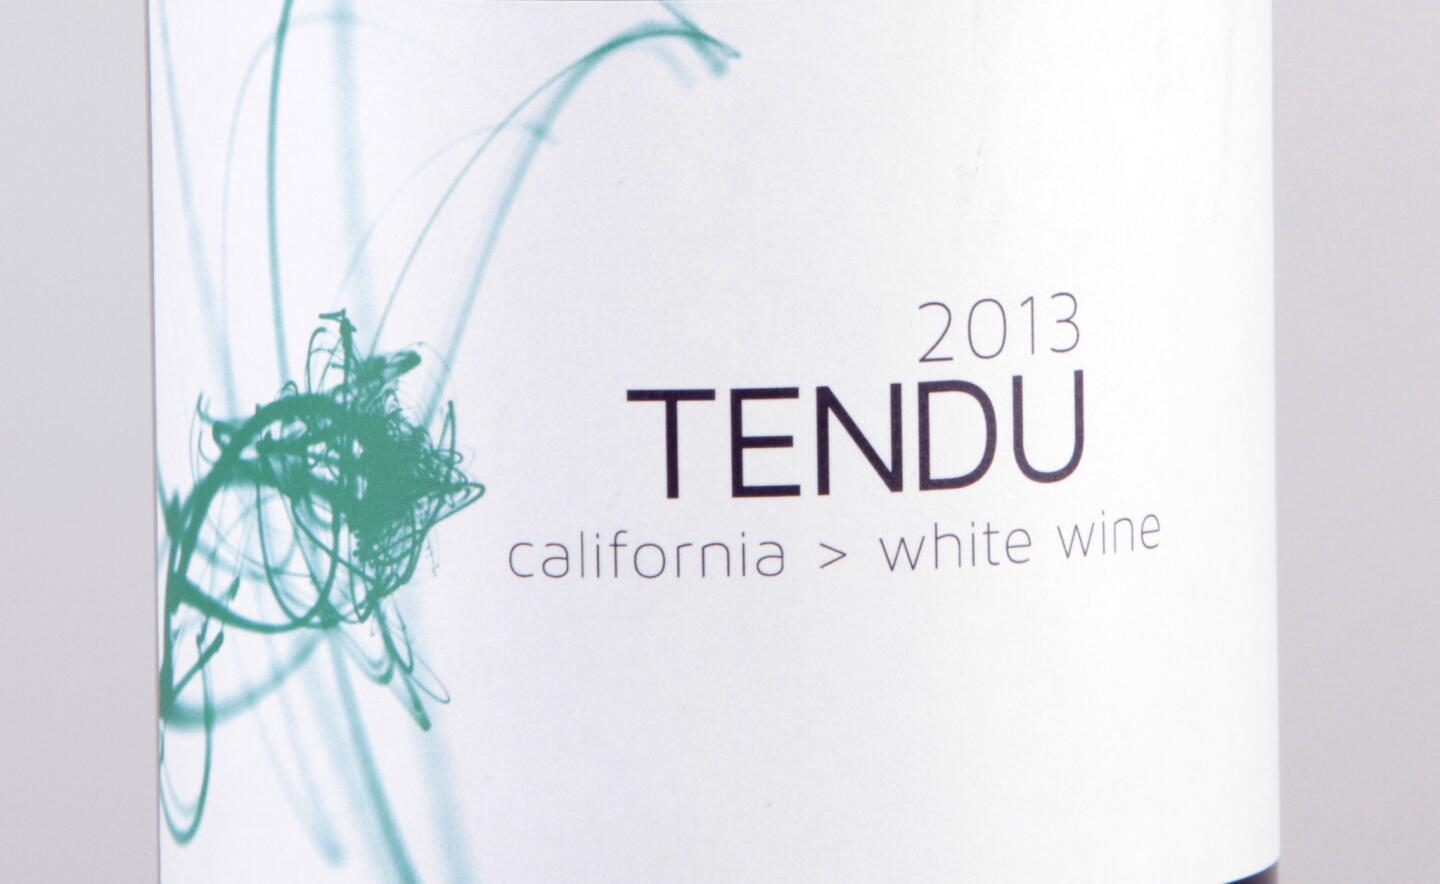 The big 1 liter bottle closed with a white cap like a soda pop. A terrific little white wine from one of California's most interesting winemakers. With its notes of grapefruit and citrus rind, Tendu white wine is a lot of wine for the money. About $20.